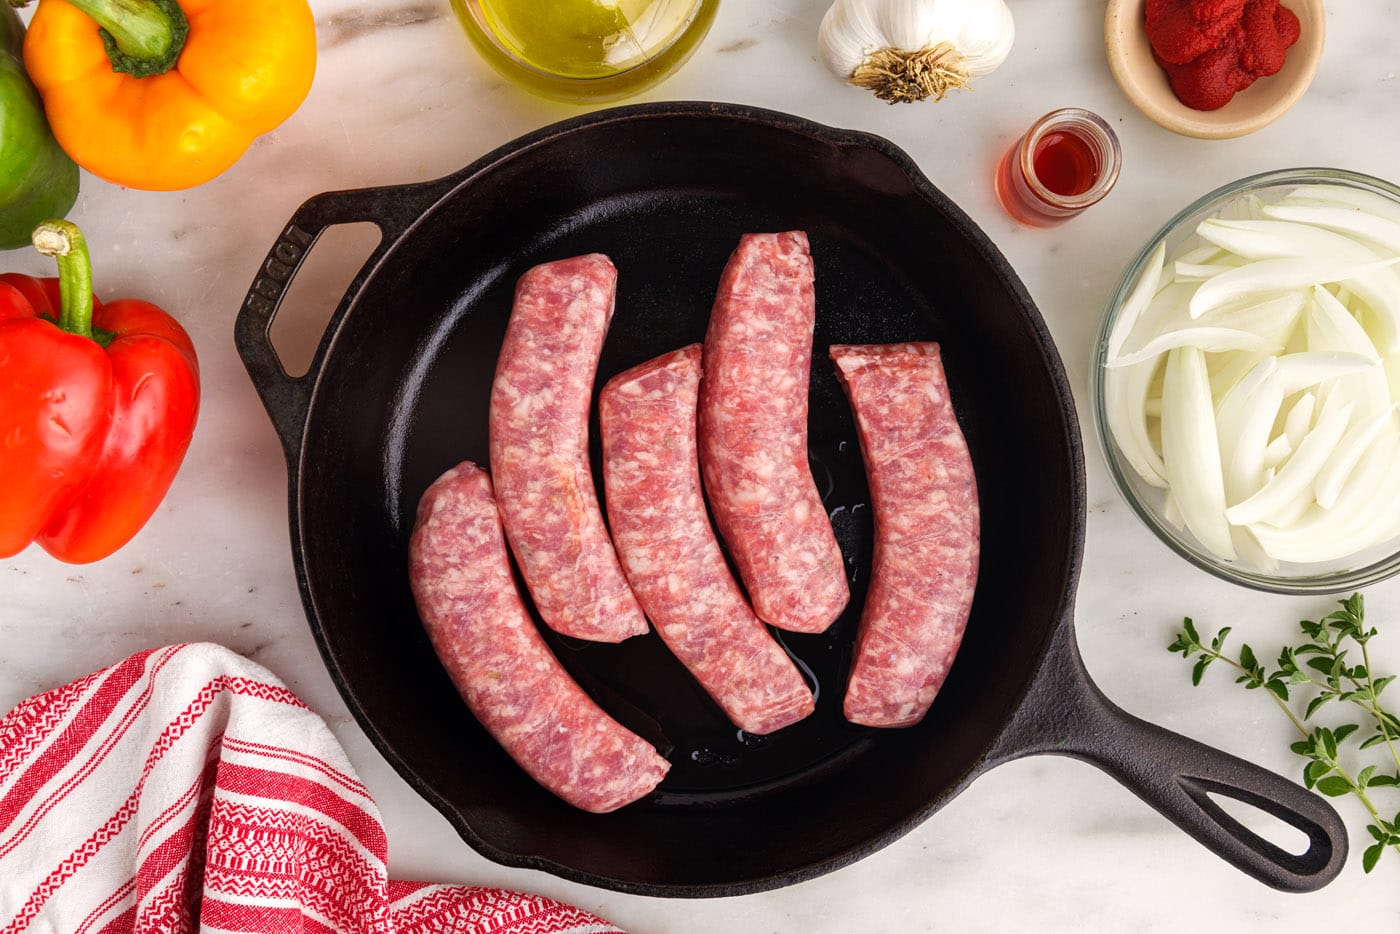 Italian sausage in a cast iron skillet